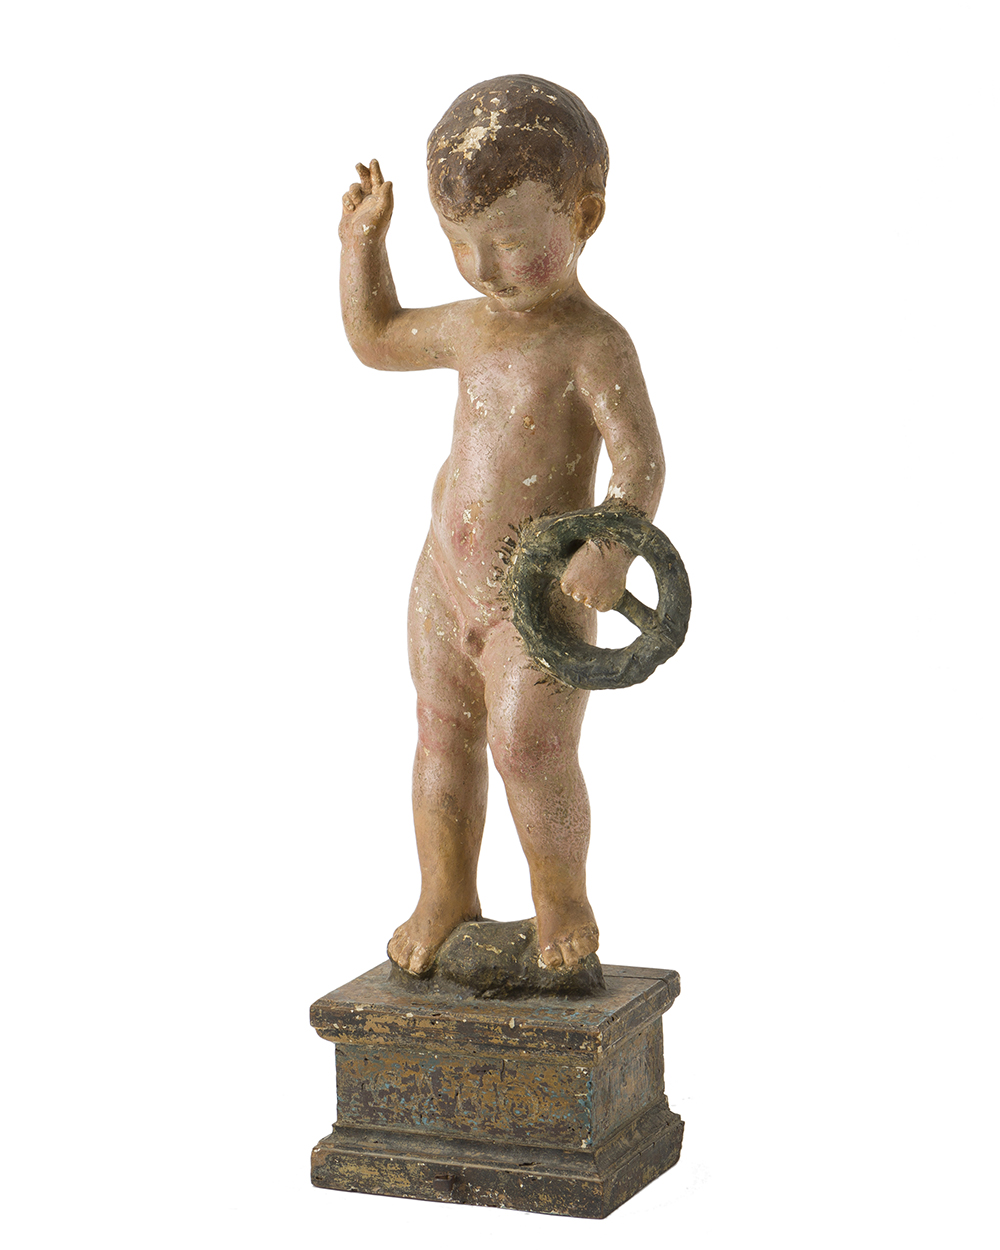 A carved and polychromed figure of the Christ child